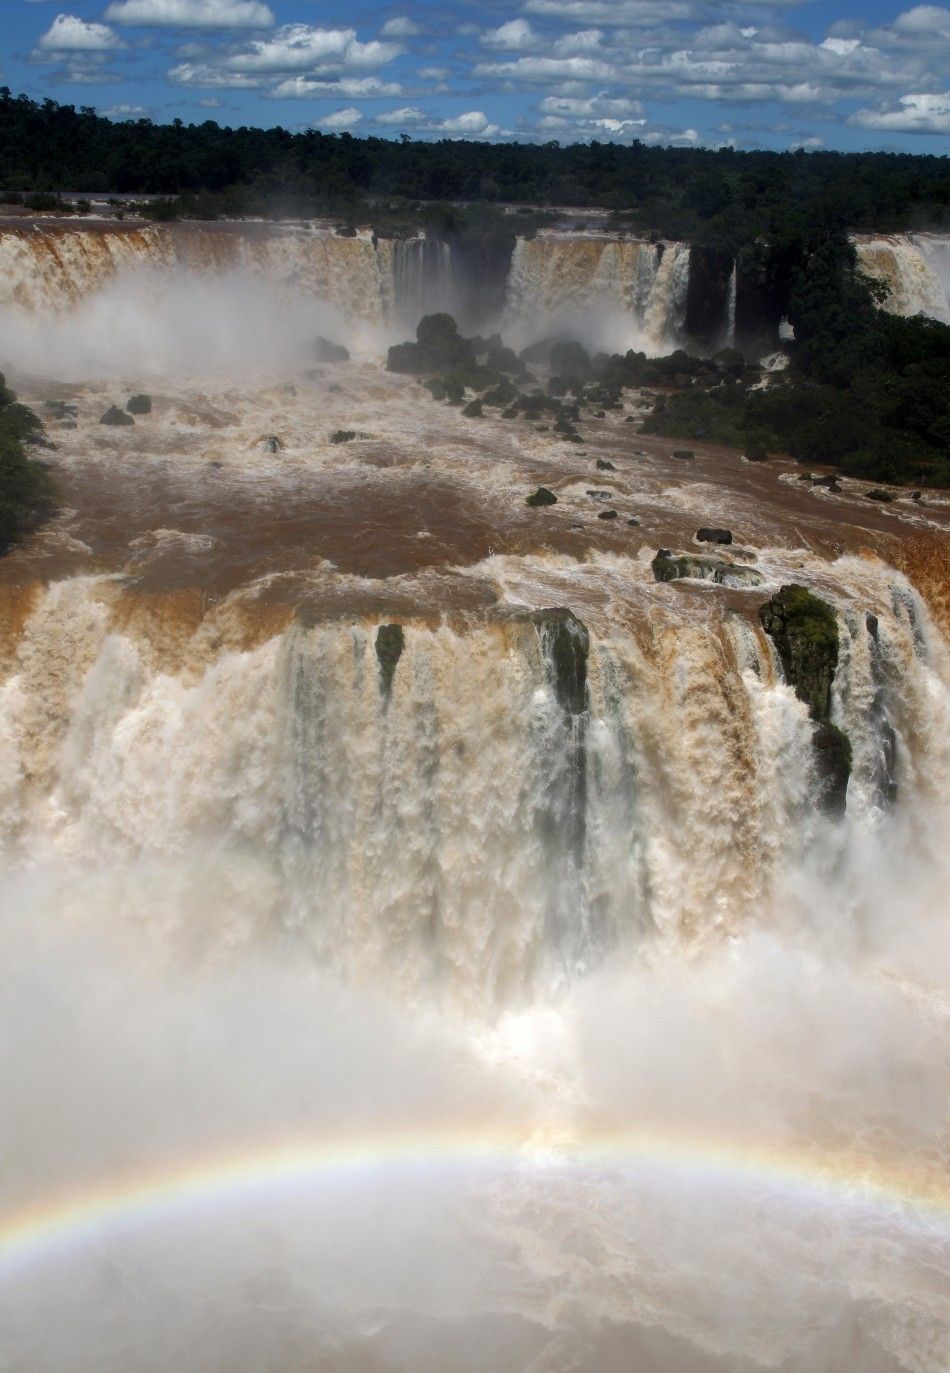 A rainbow is seen at the Iguazu Falls on the border of Argentinas province of Misiones and Brazils State of Parana.